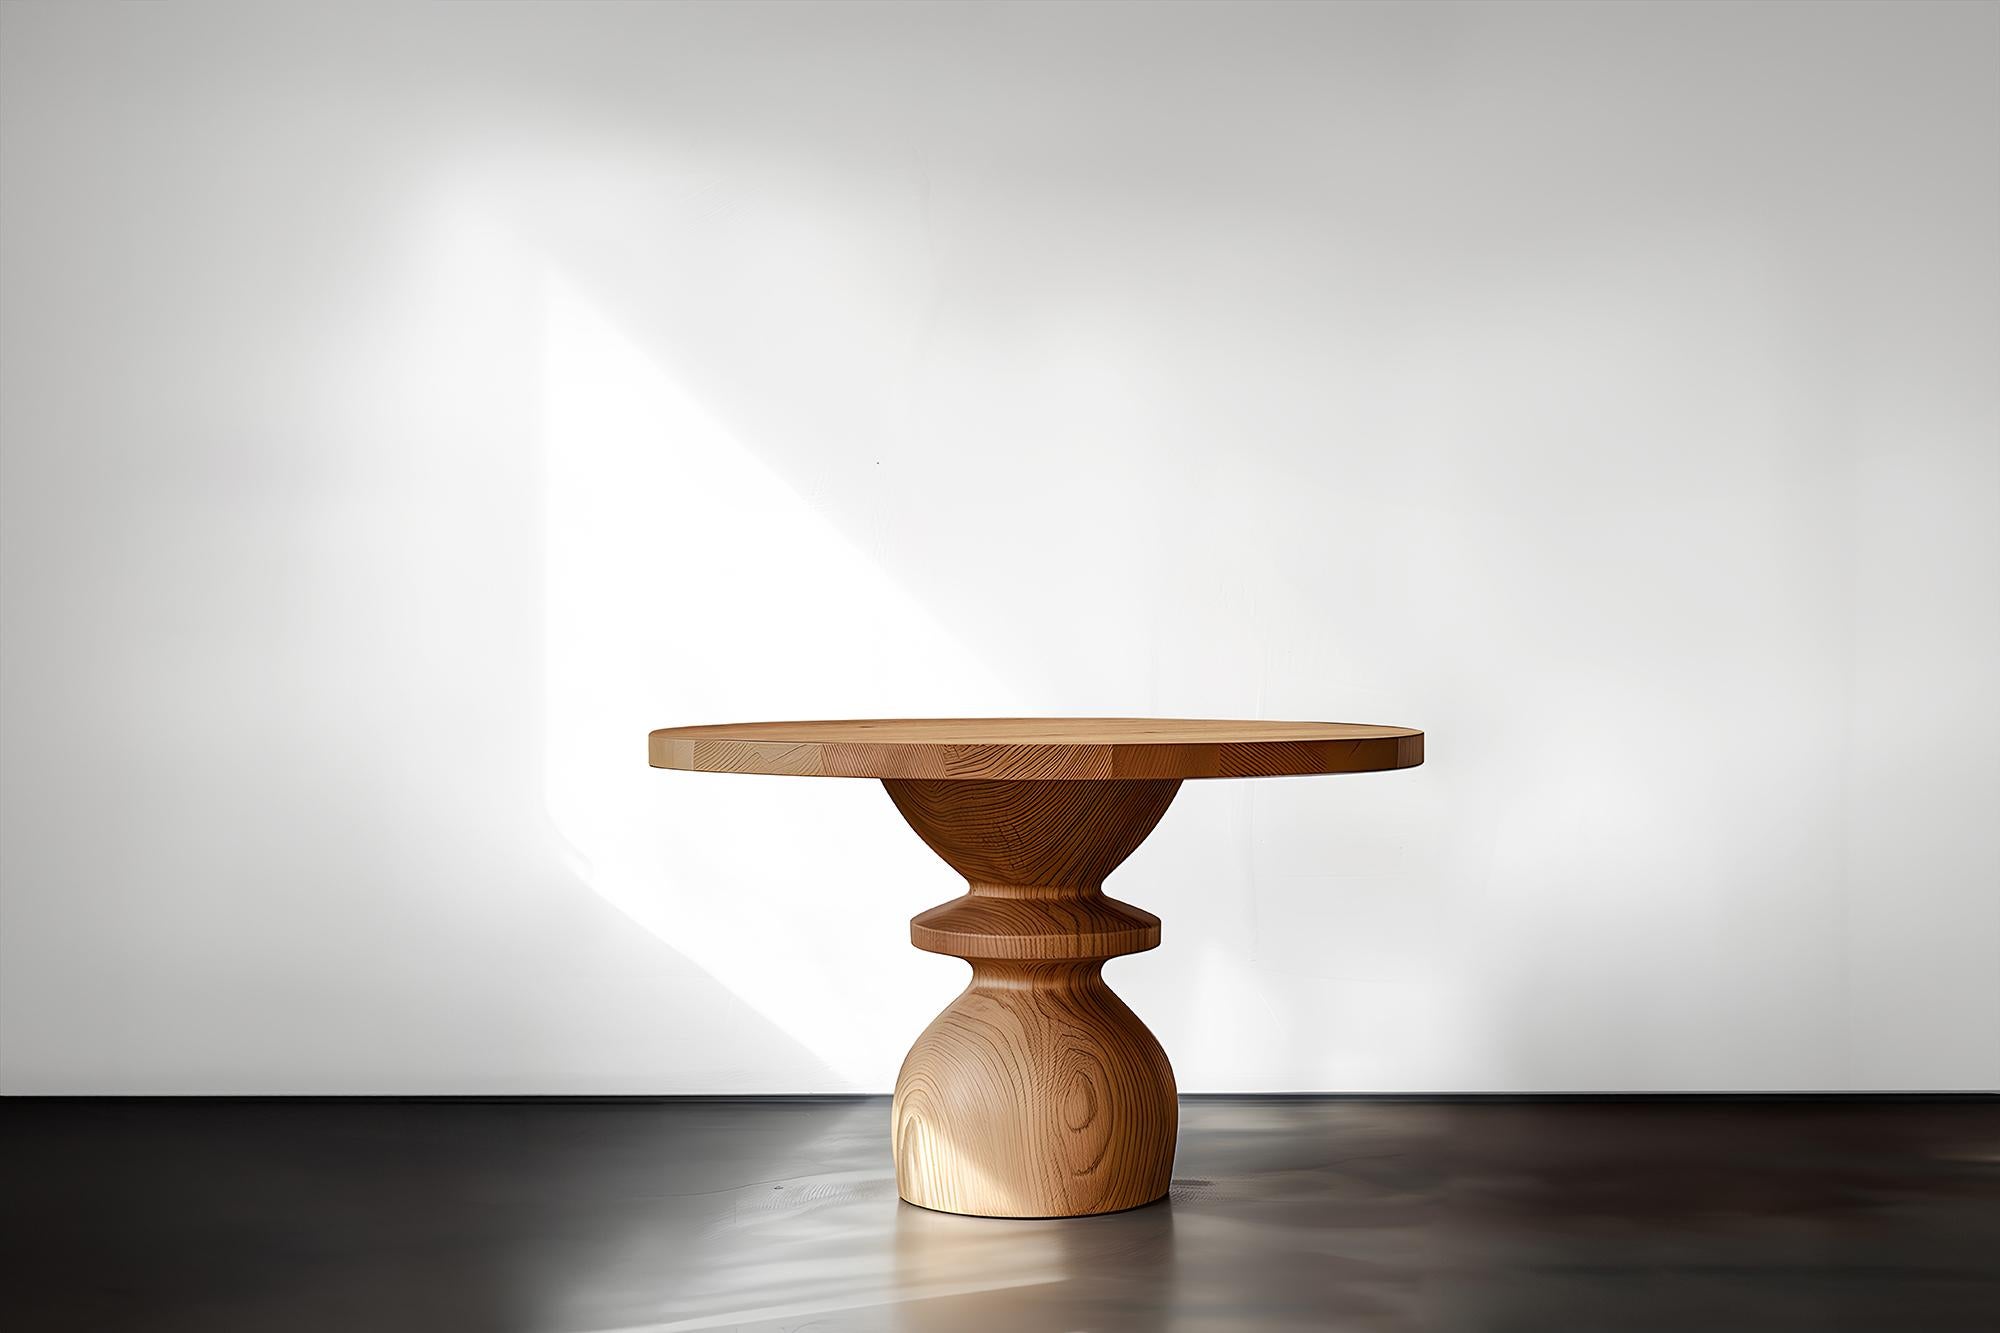 Joel Escalona Designs Socle Dessert Tables, Sweet in Solid Wood No22

——

Introducing the 